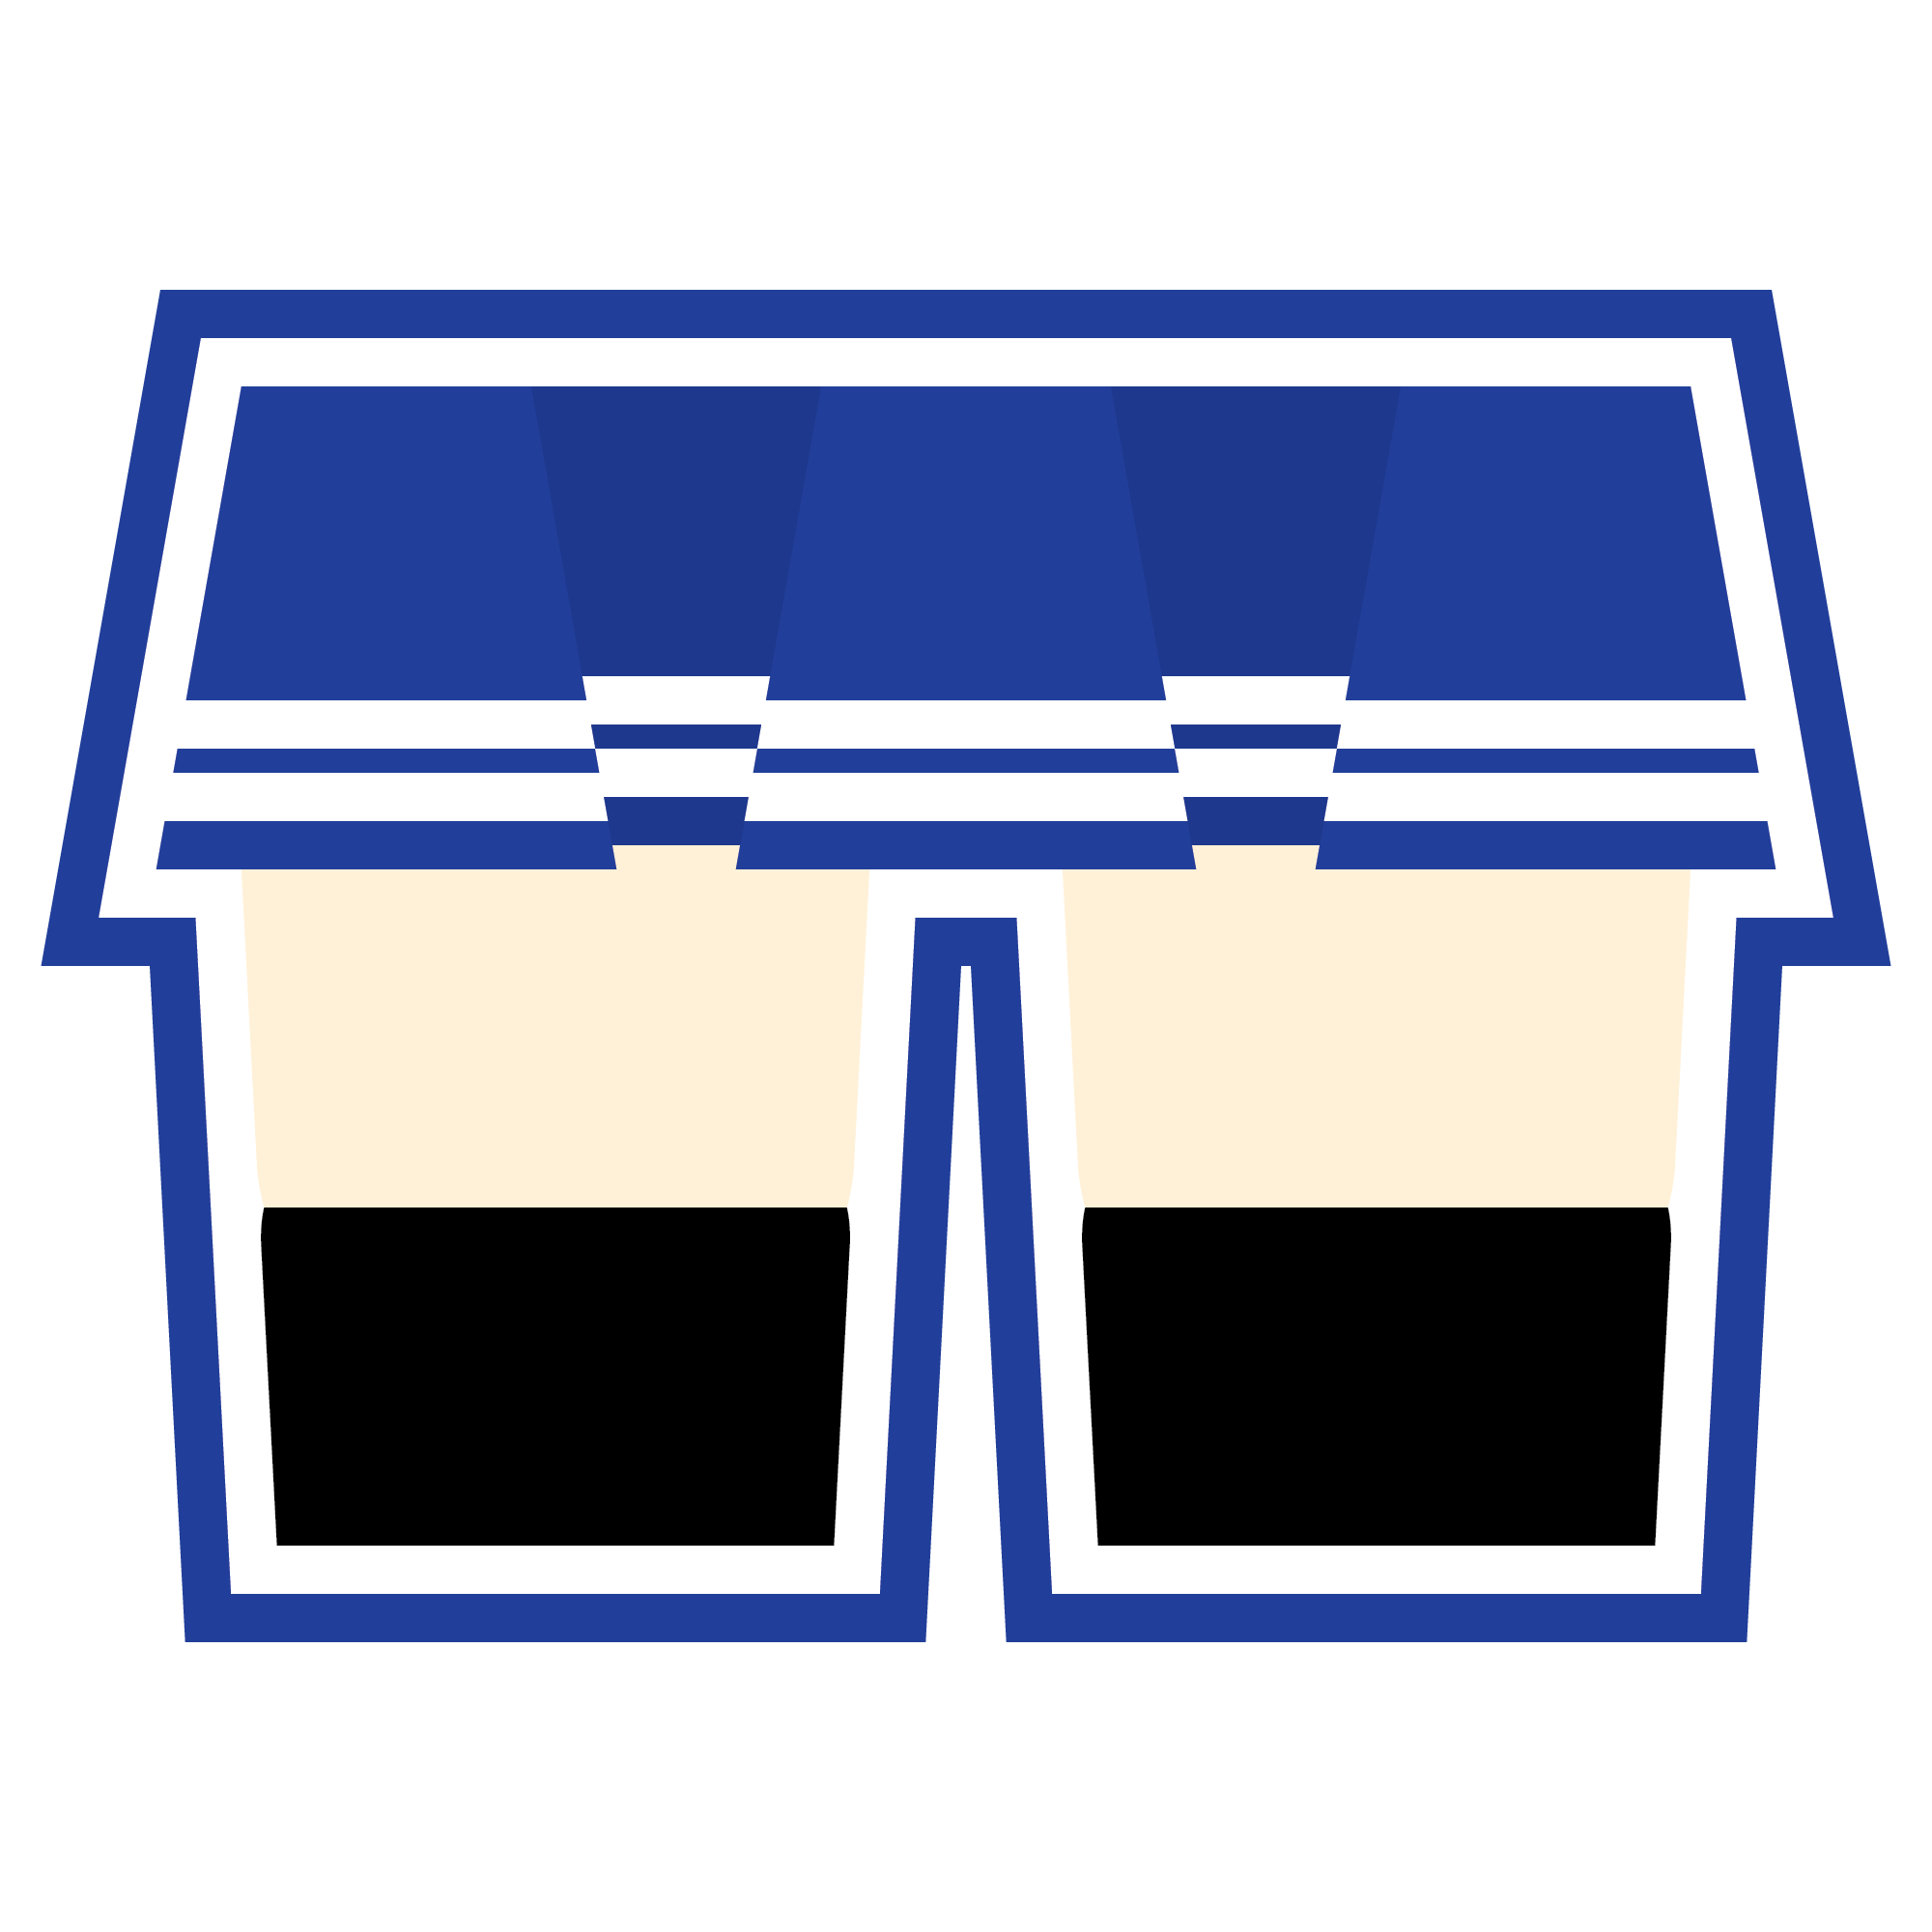 Absolute Territory